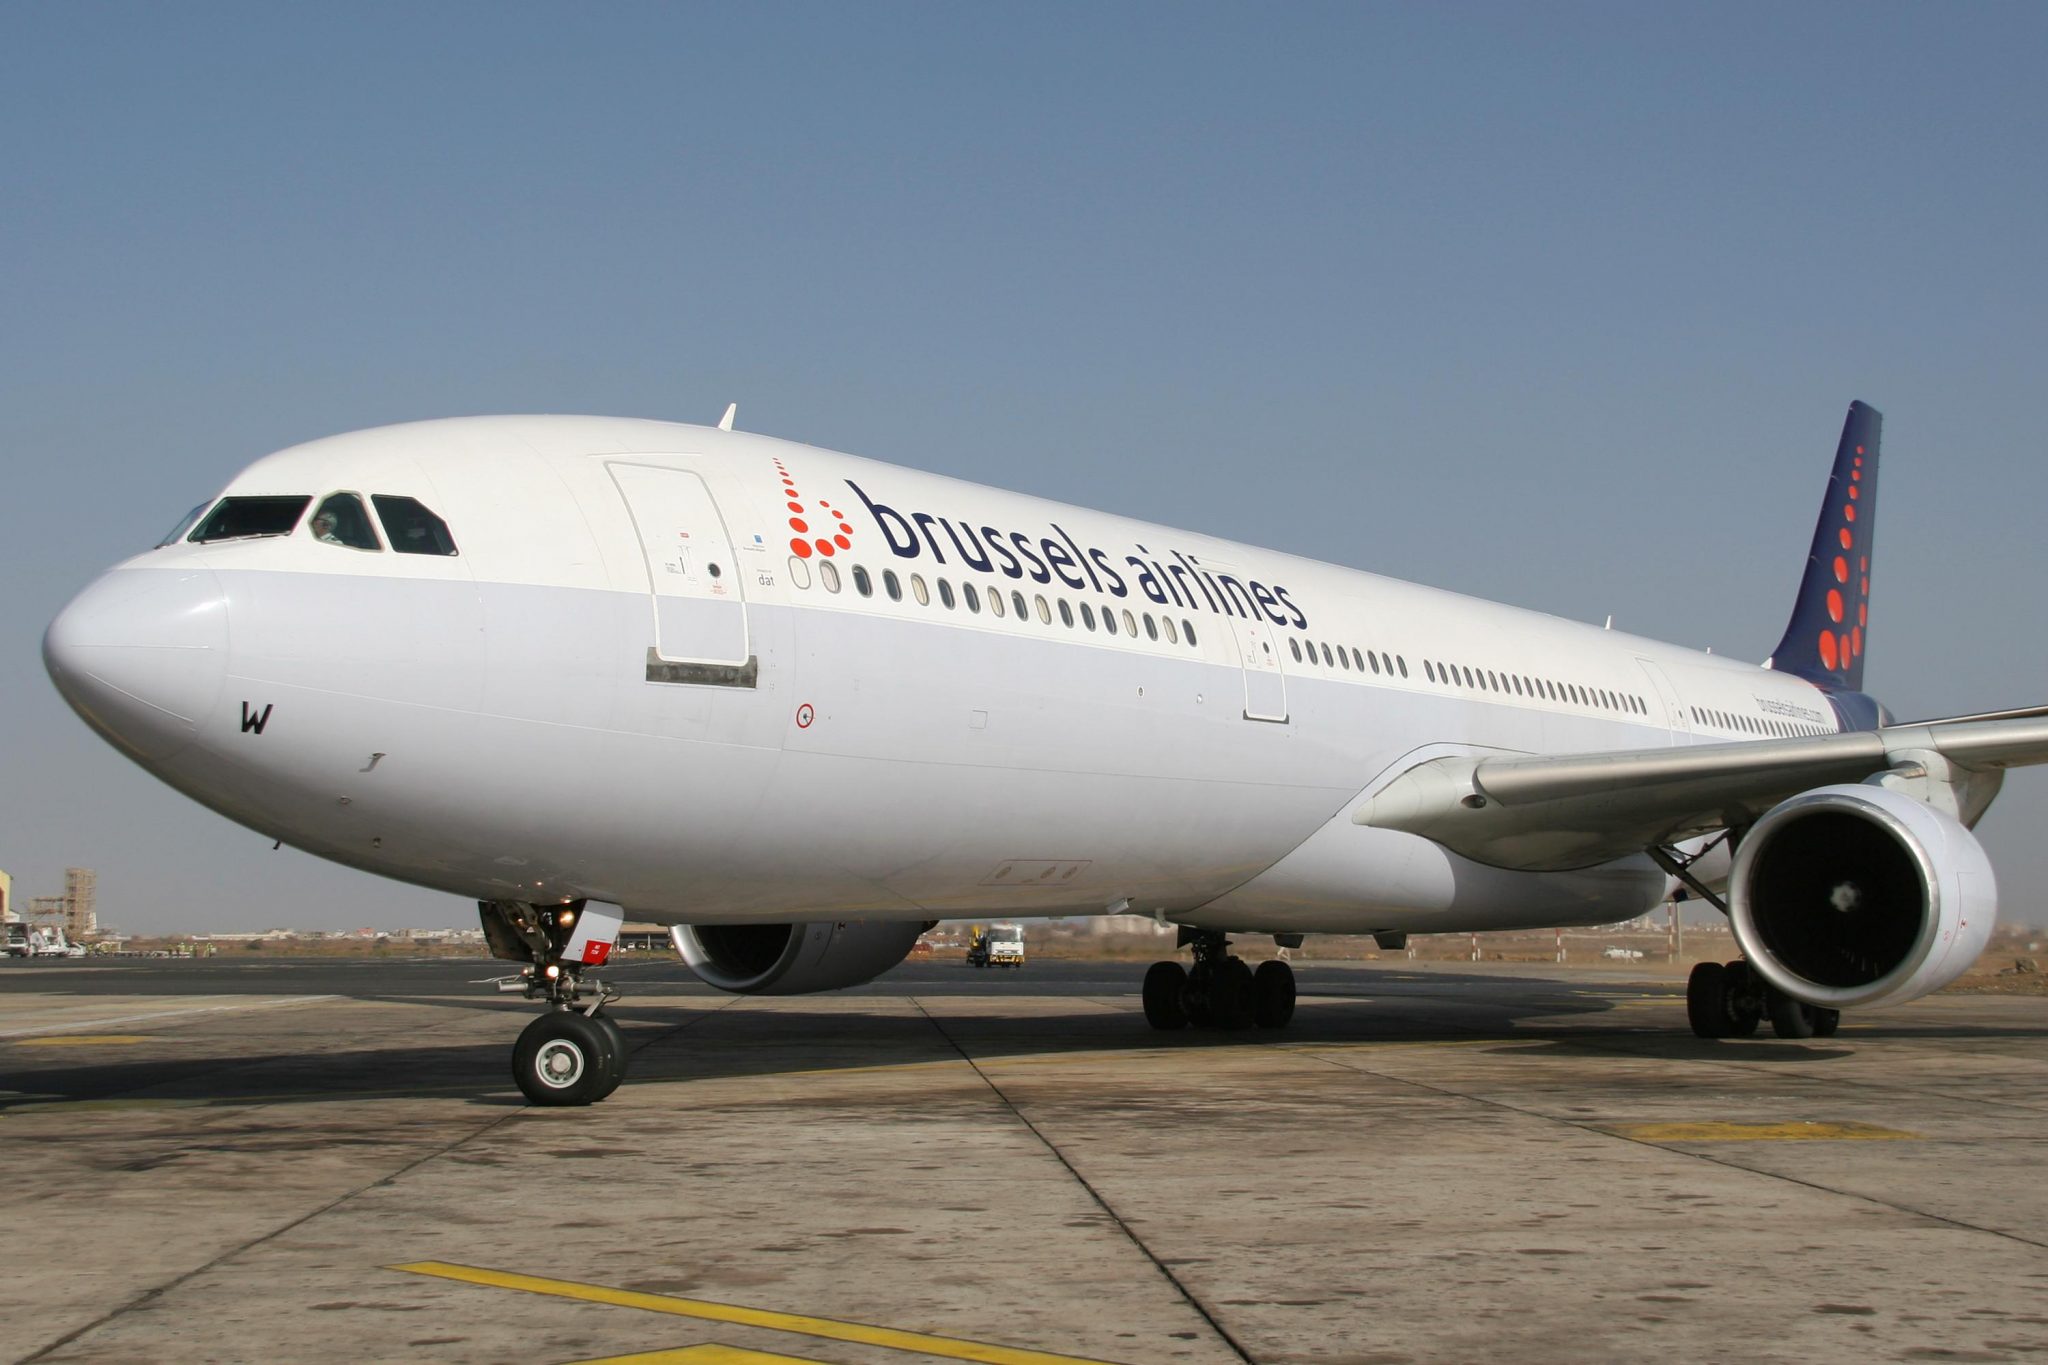 Brussels Airlines announces fleet expansion, expects 10% growth in operations